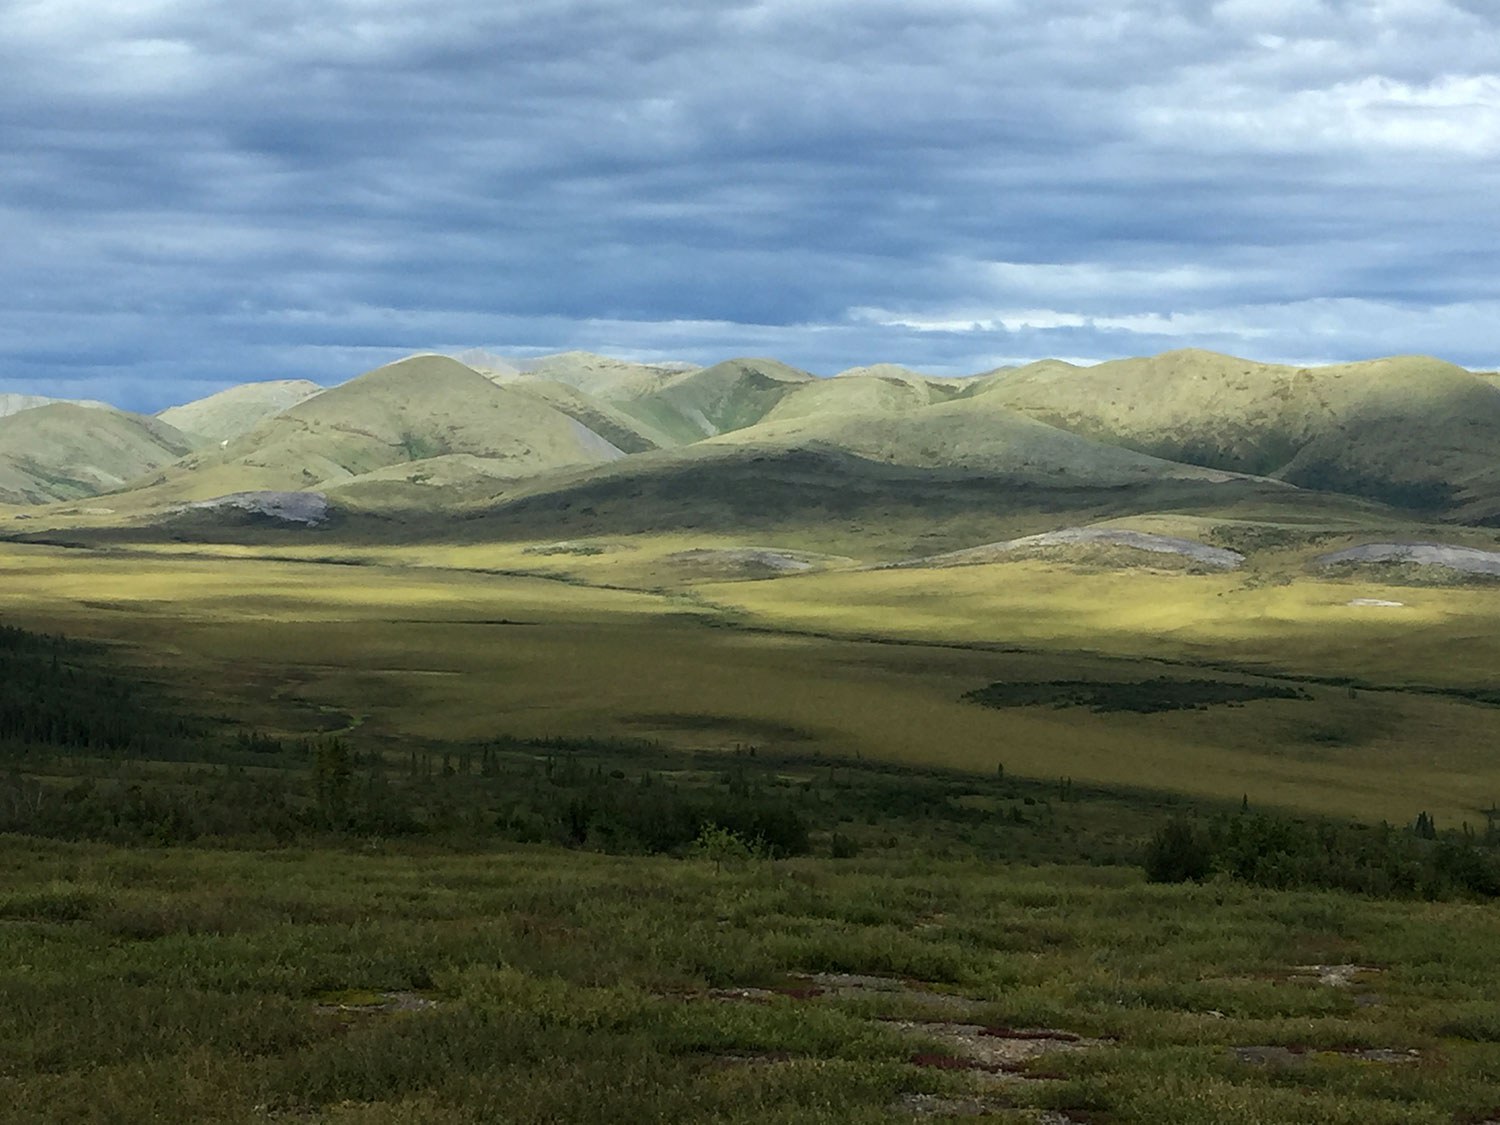 Richardson Mountains, in the Northwest Territories, is part of the vast cross-boundary migratory route of the porcupine caribou herd and an example of a large landscape. (Photo: Lisa Prosper)